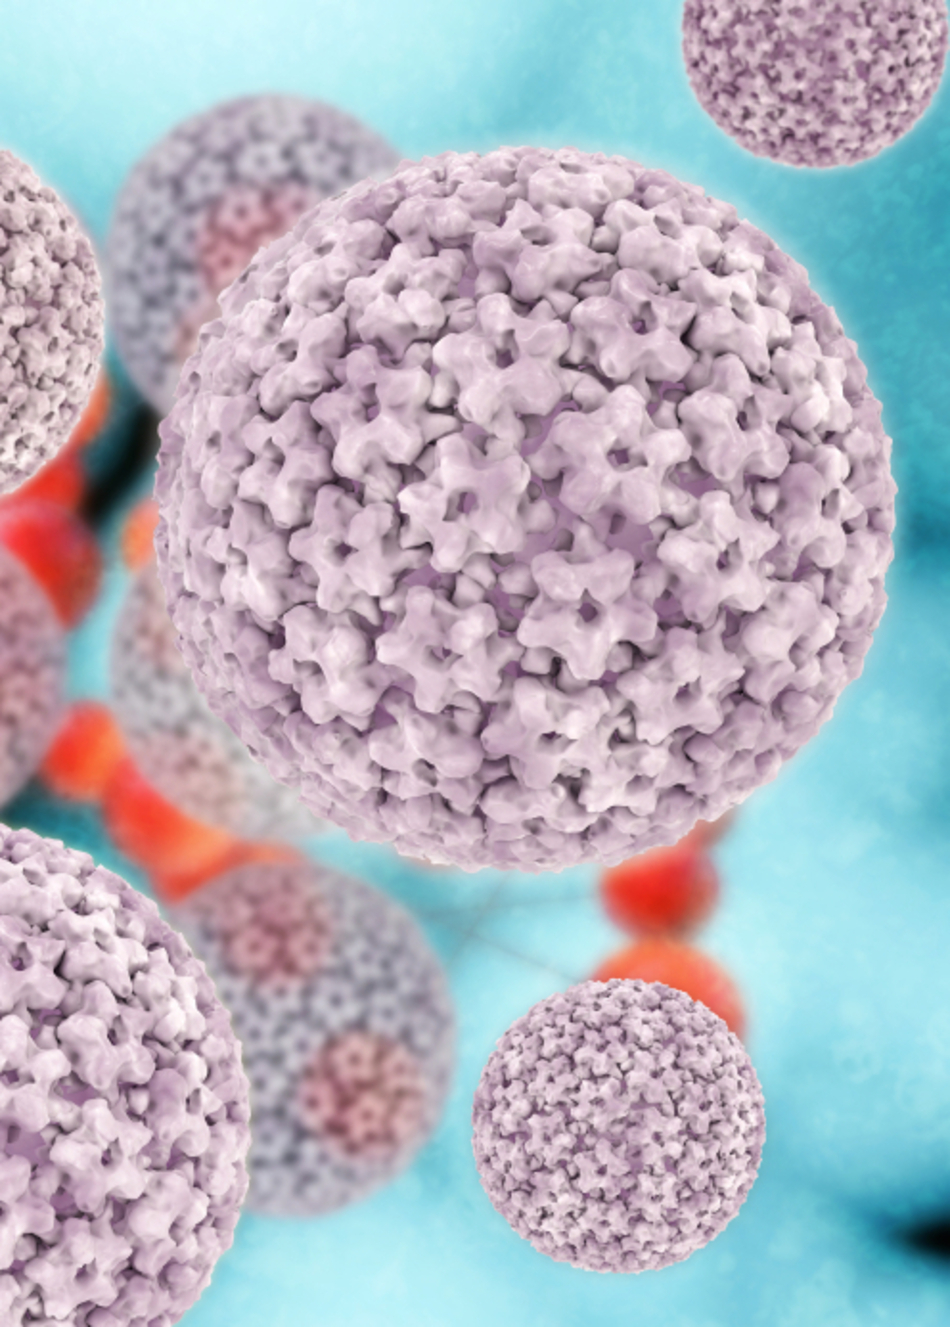 How Are HPV and Head and Neck Cancer Related?